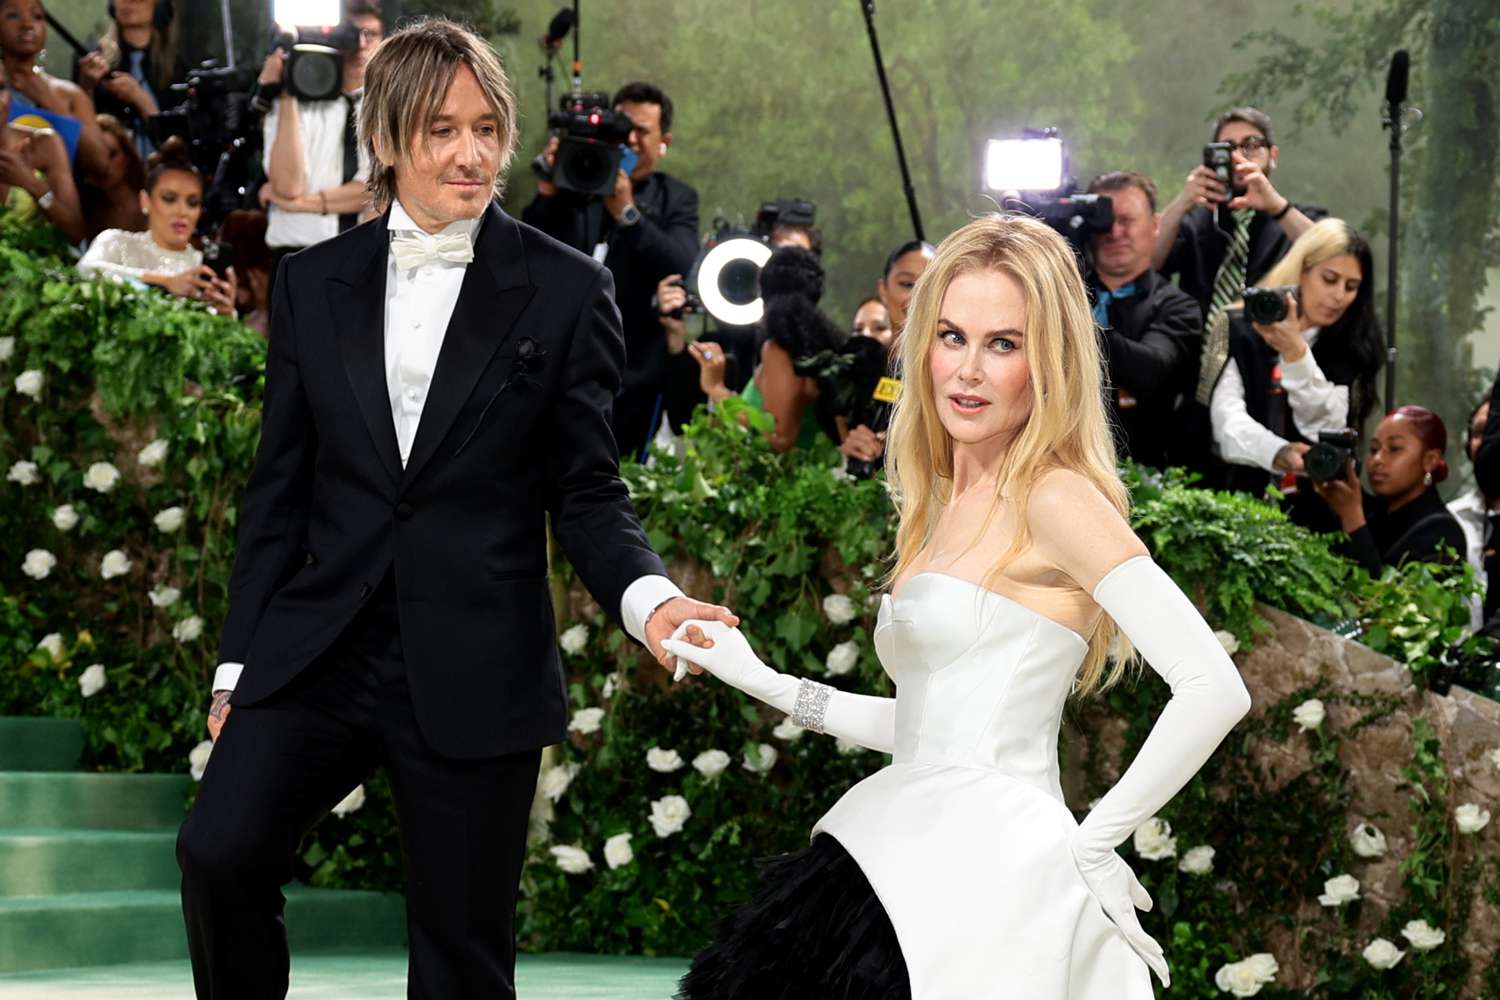 Nicole Kidman Admits the Met Gala Still Makes Her Nervous, but Her 'Man' Keith Urban Brings the Calm (Exclusive)